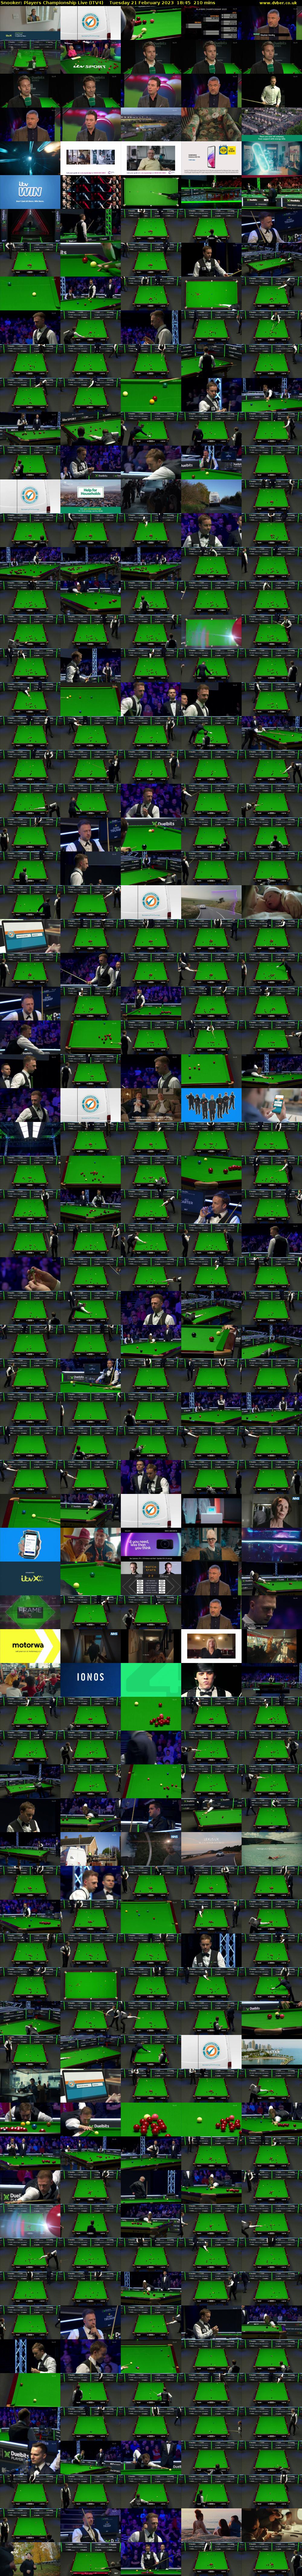 Snooker: Players Championship Live (ITV4) Tuesday 21 February 2023 18:45 - 22:15